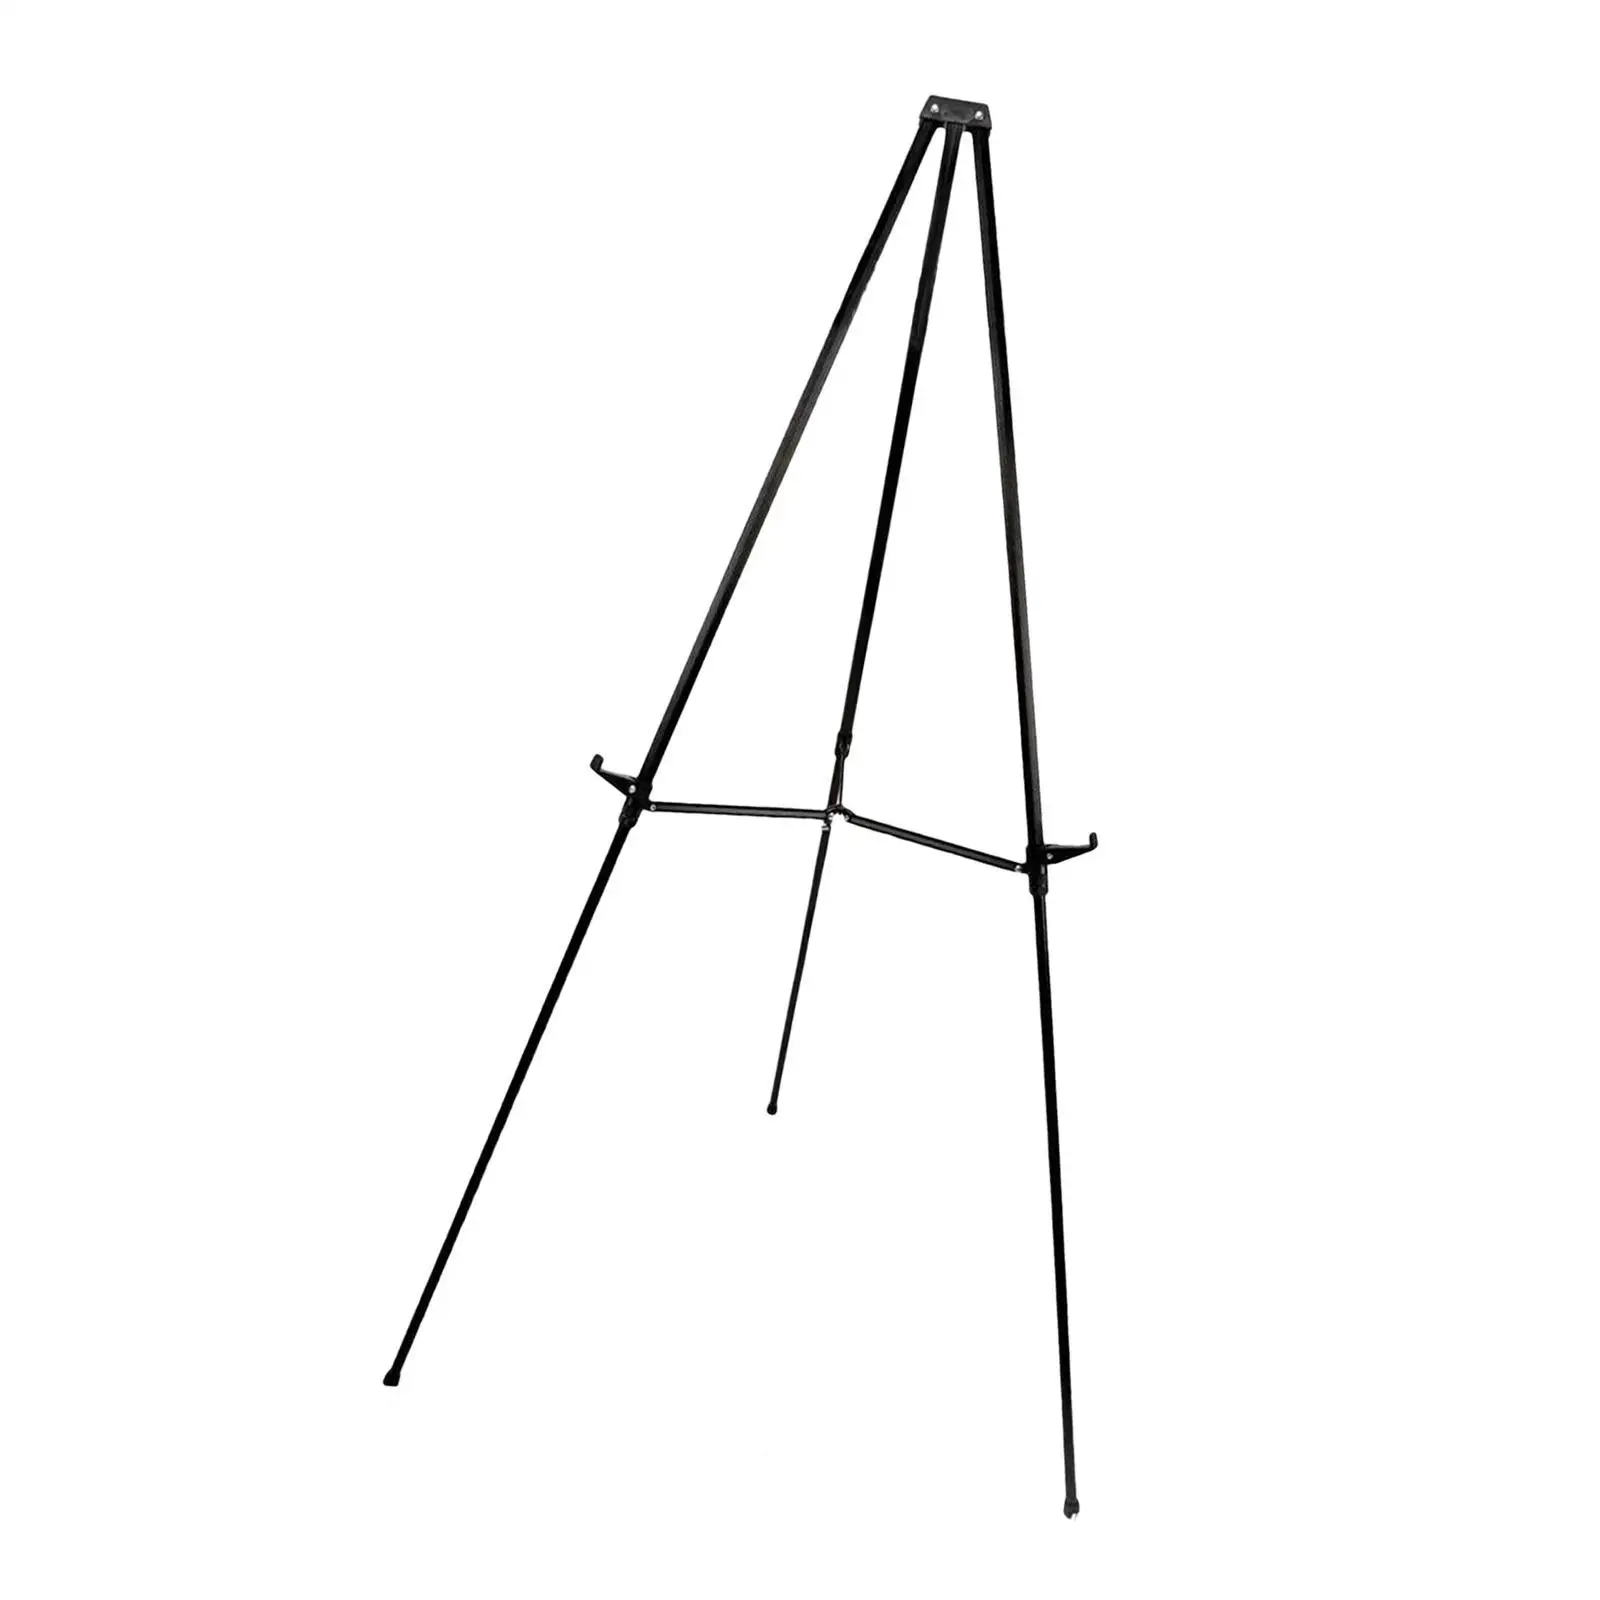 Artist Easel Metal Painting Easel Tripod Folding Tripod Display Easel Stand Holder for Floor Photo Cemetery Party Sign Wedding